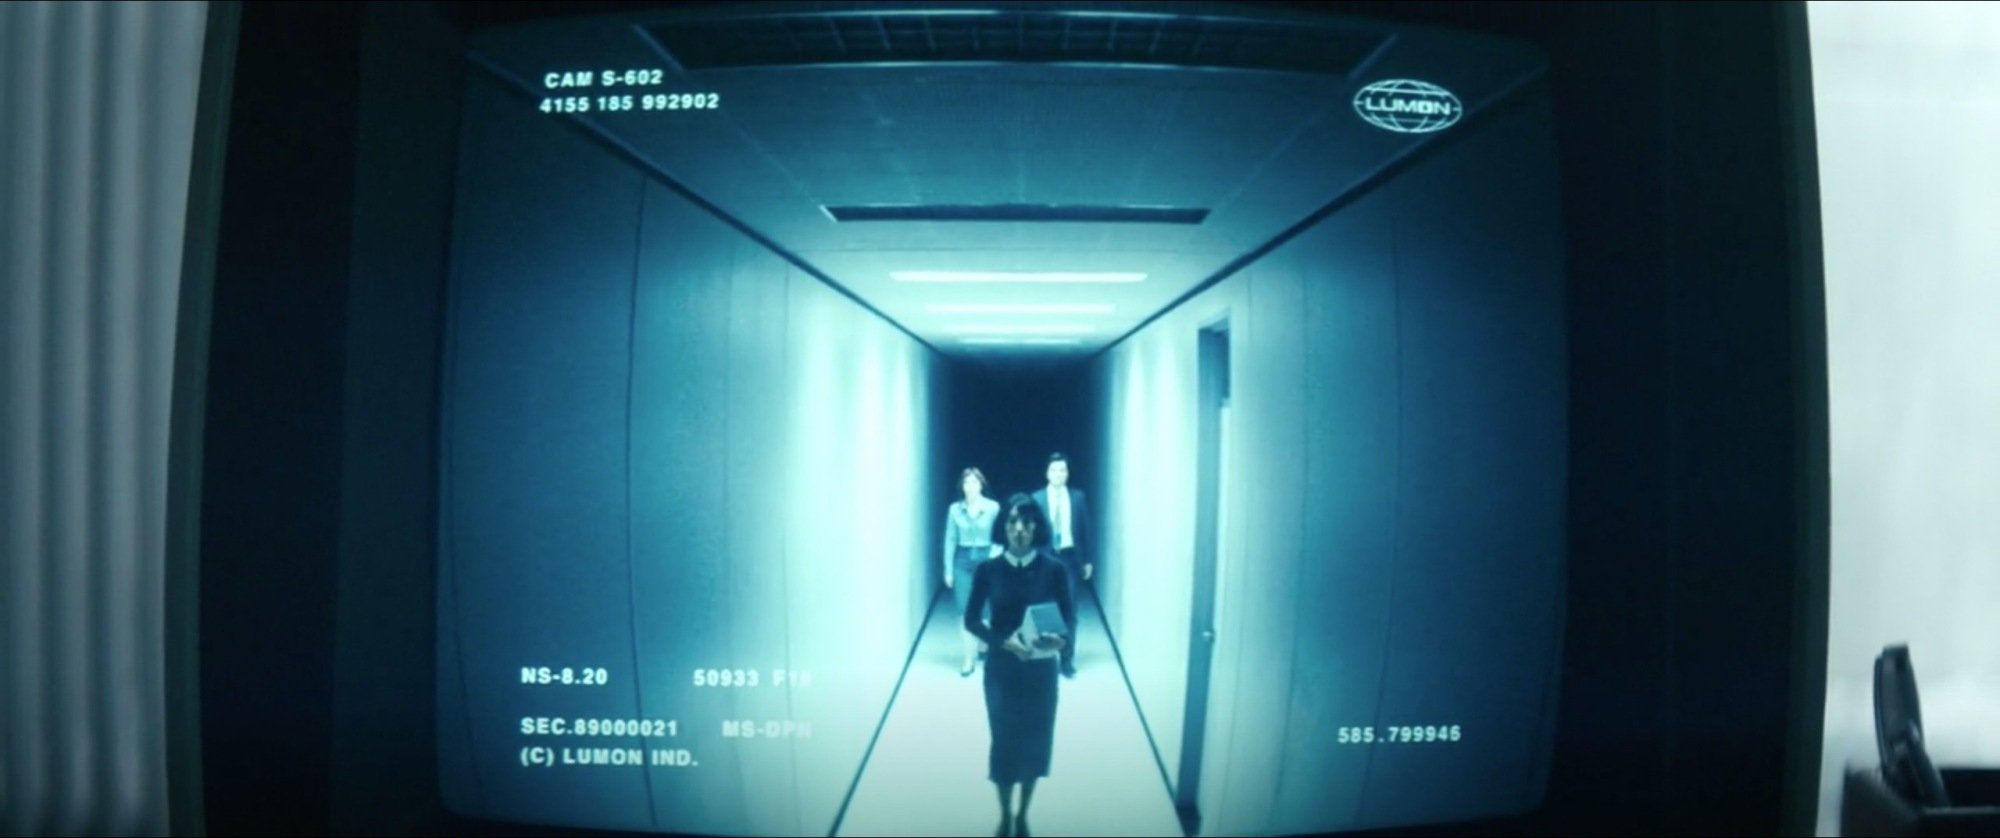 A TV screen showing security footage of three people walking down a hallway.